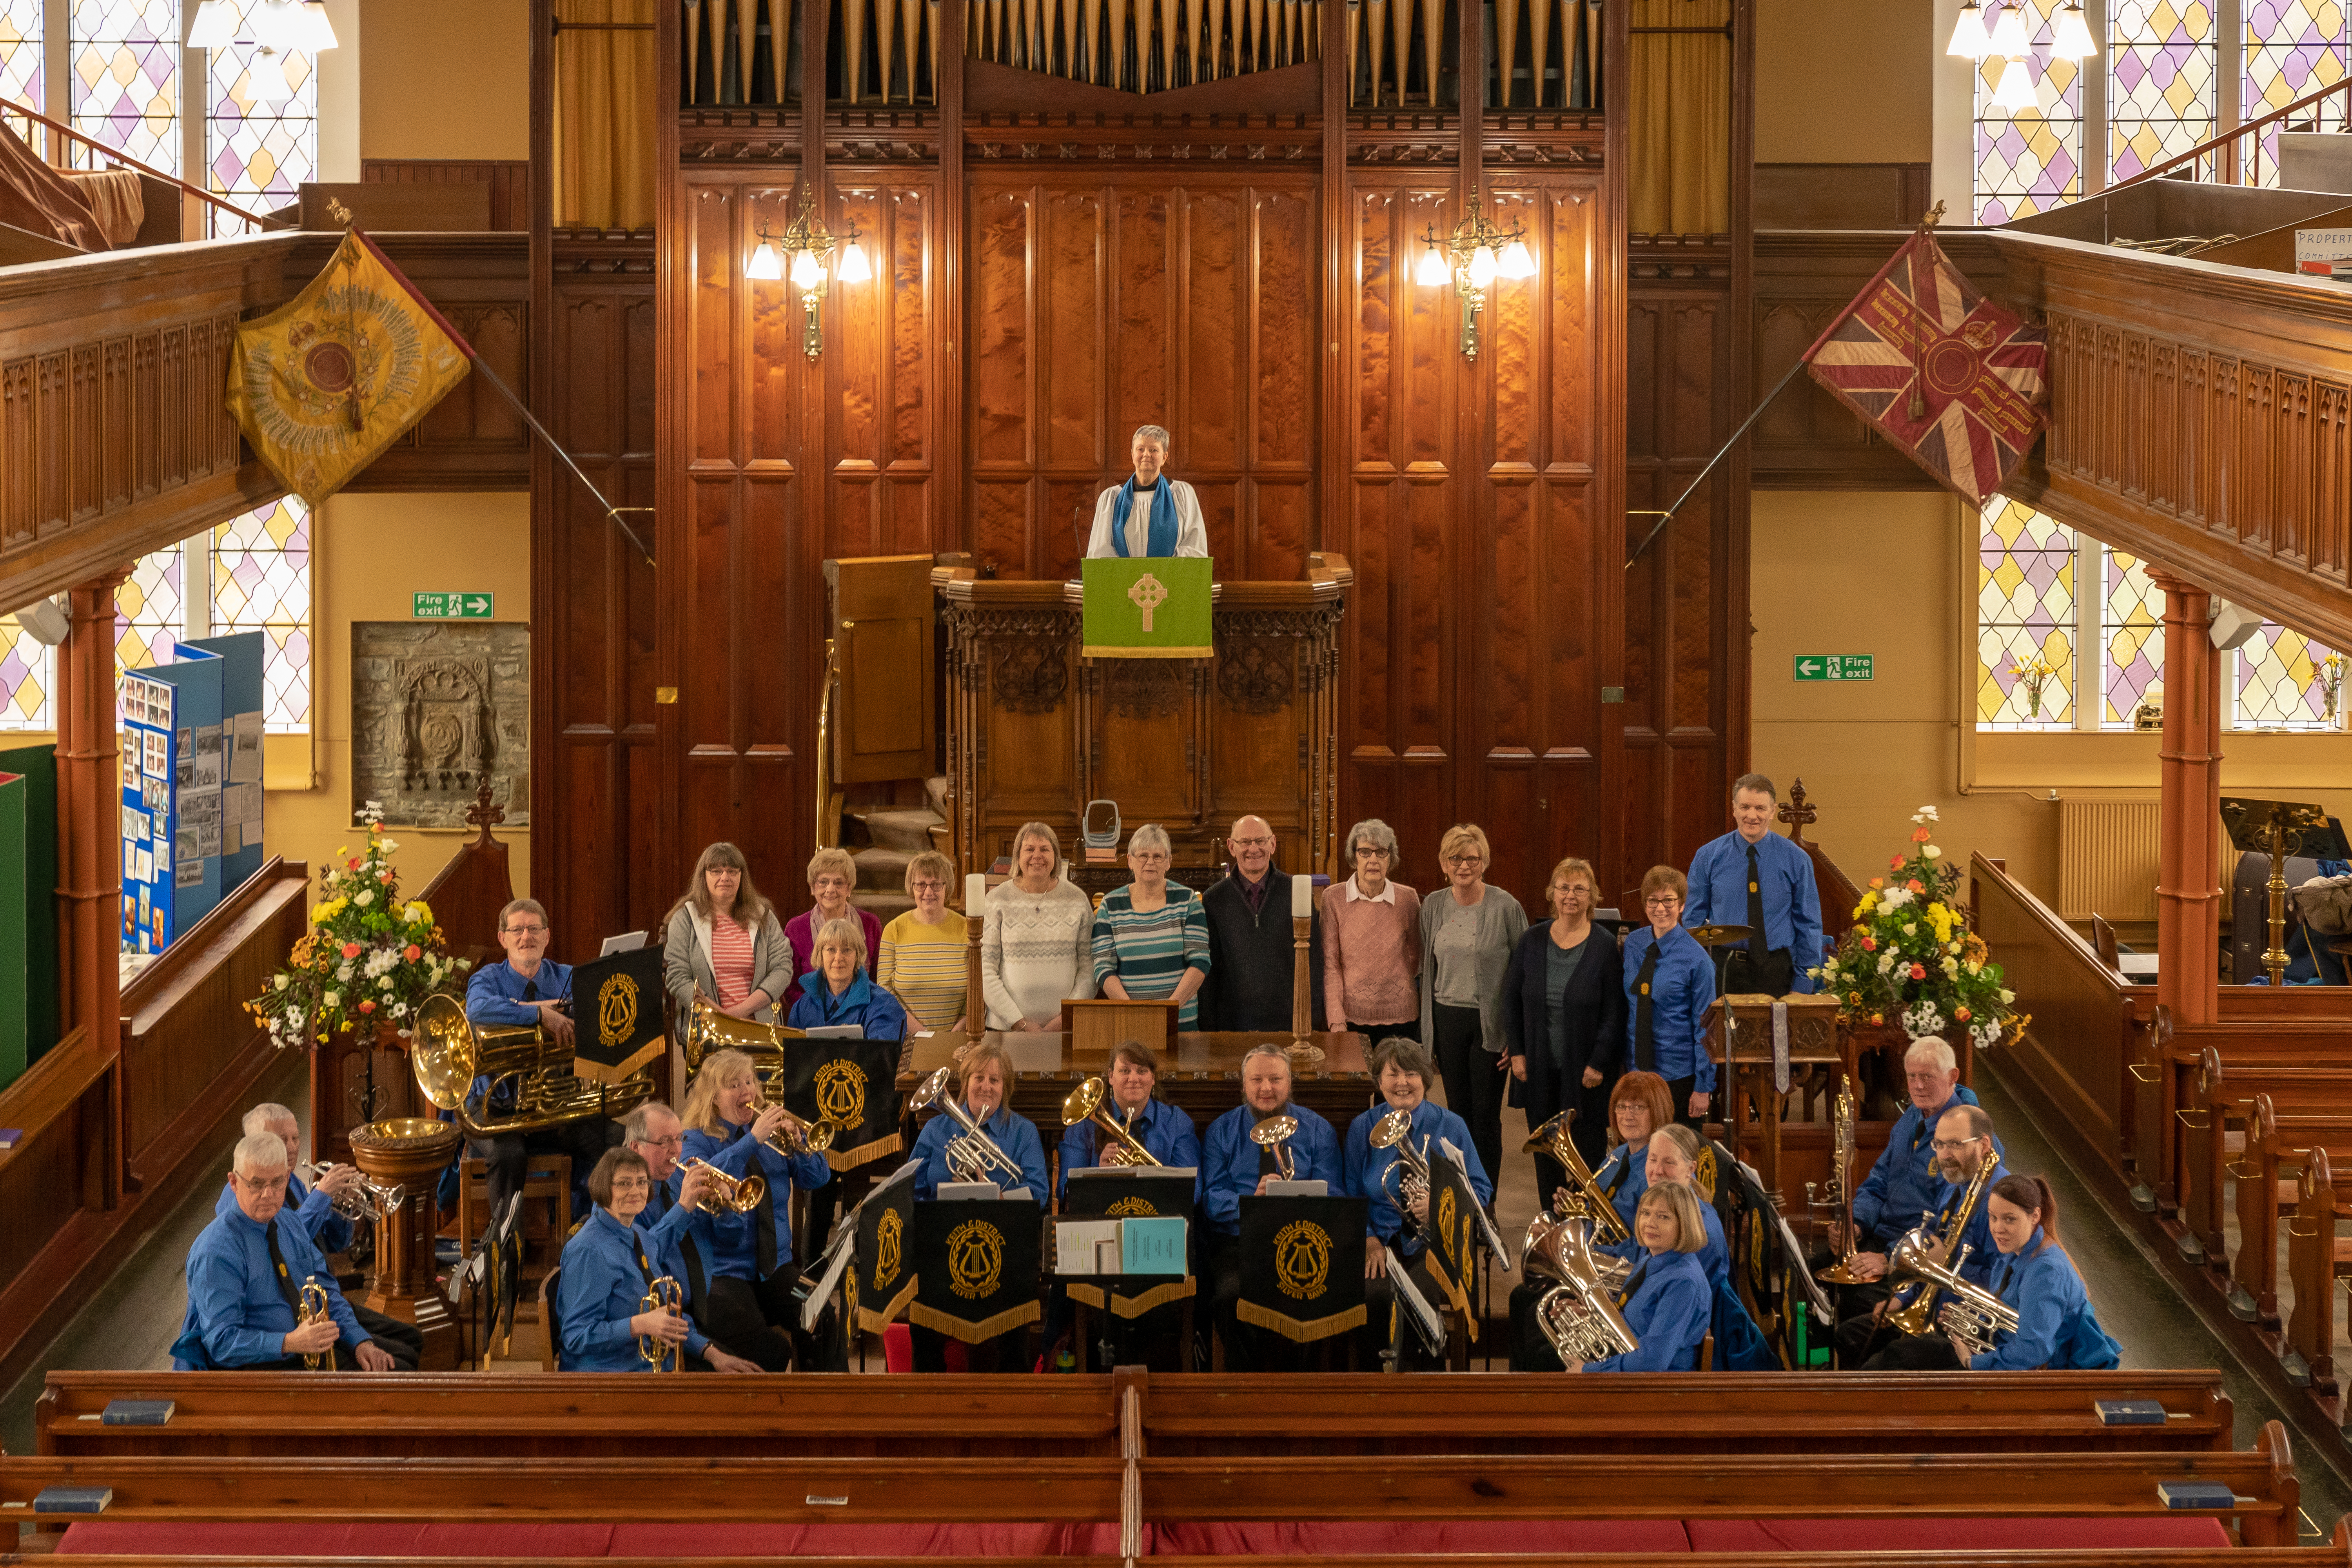 Keith and District Silver Bank performed at St Rufus Church in Keith to celebrate 200 years since it opened.